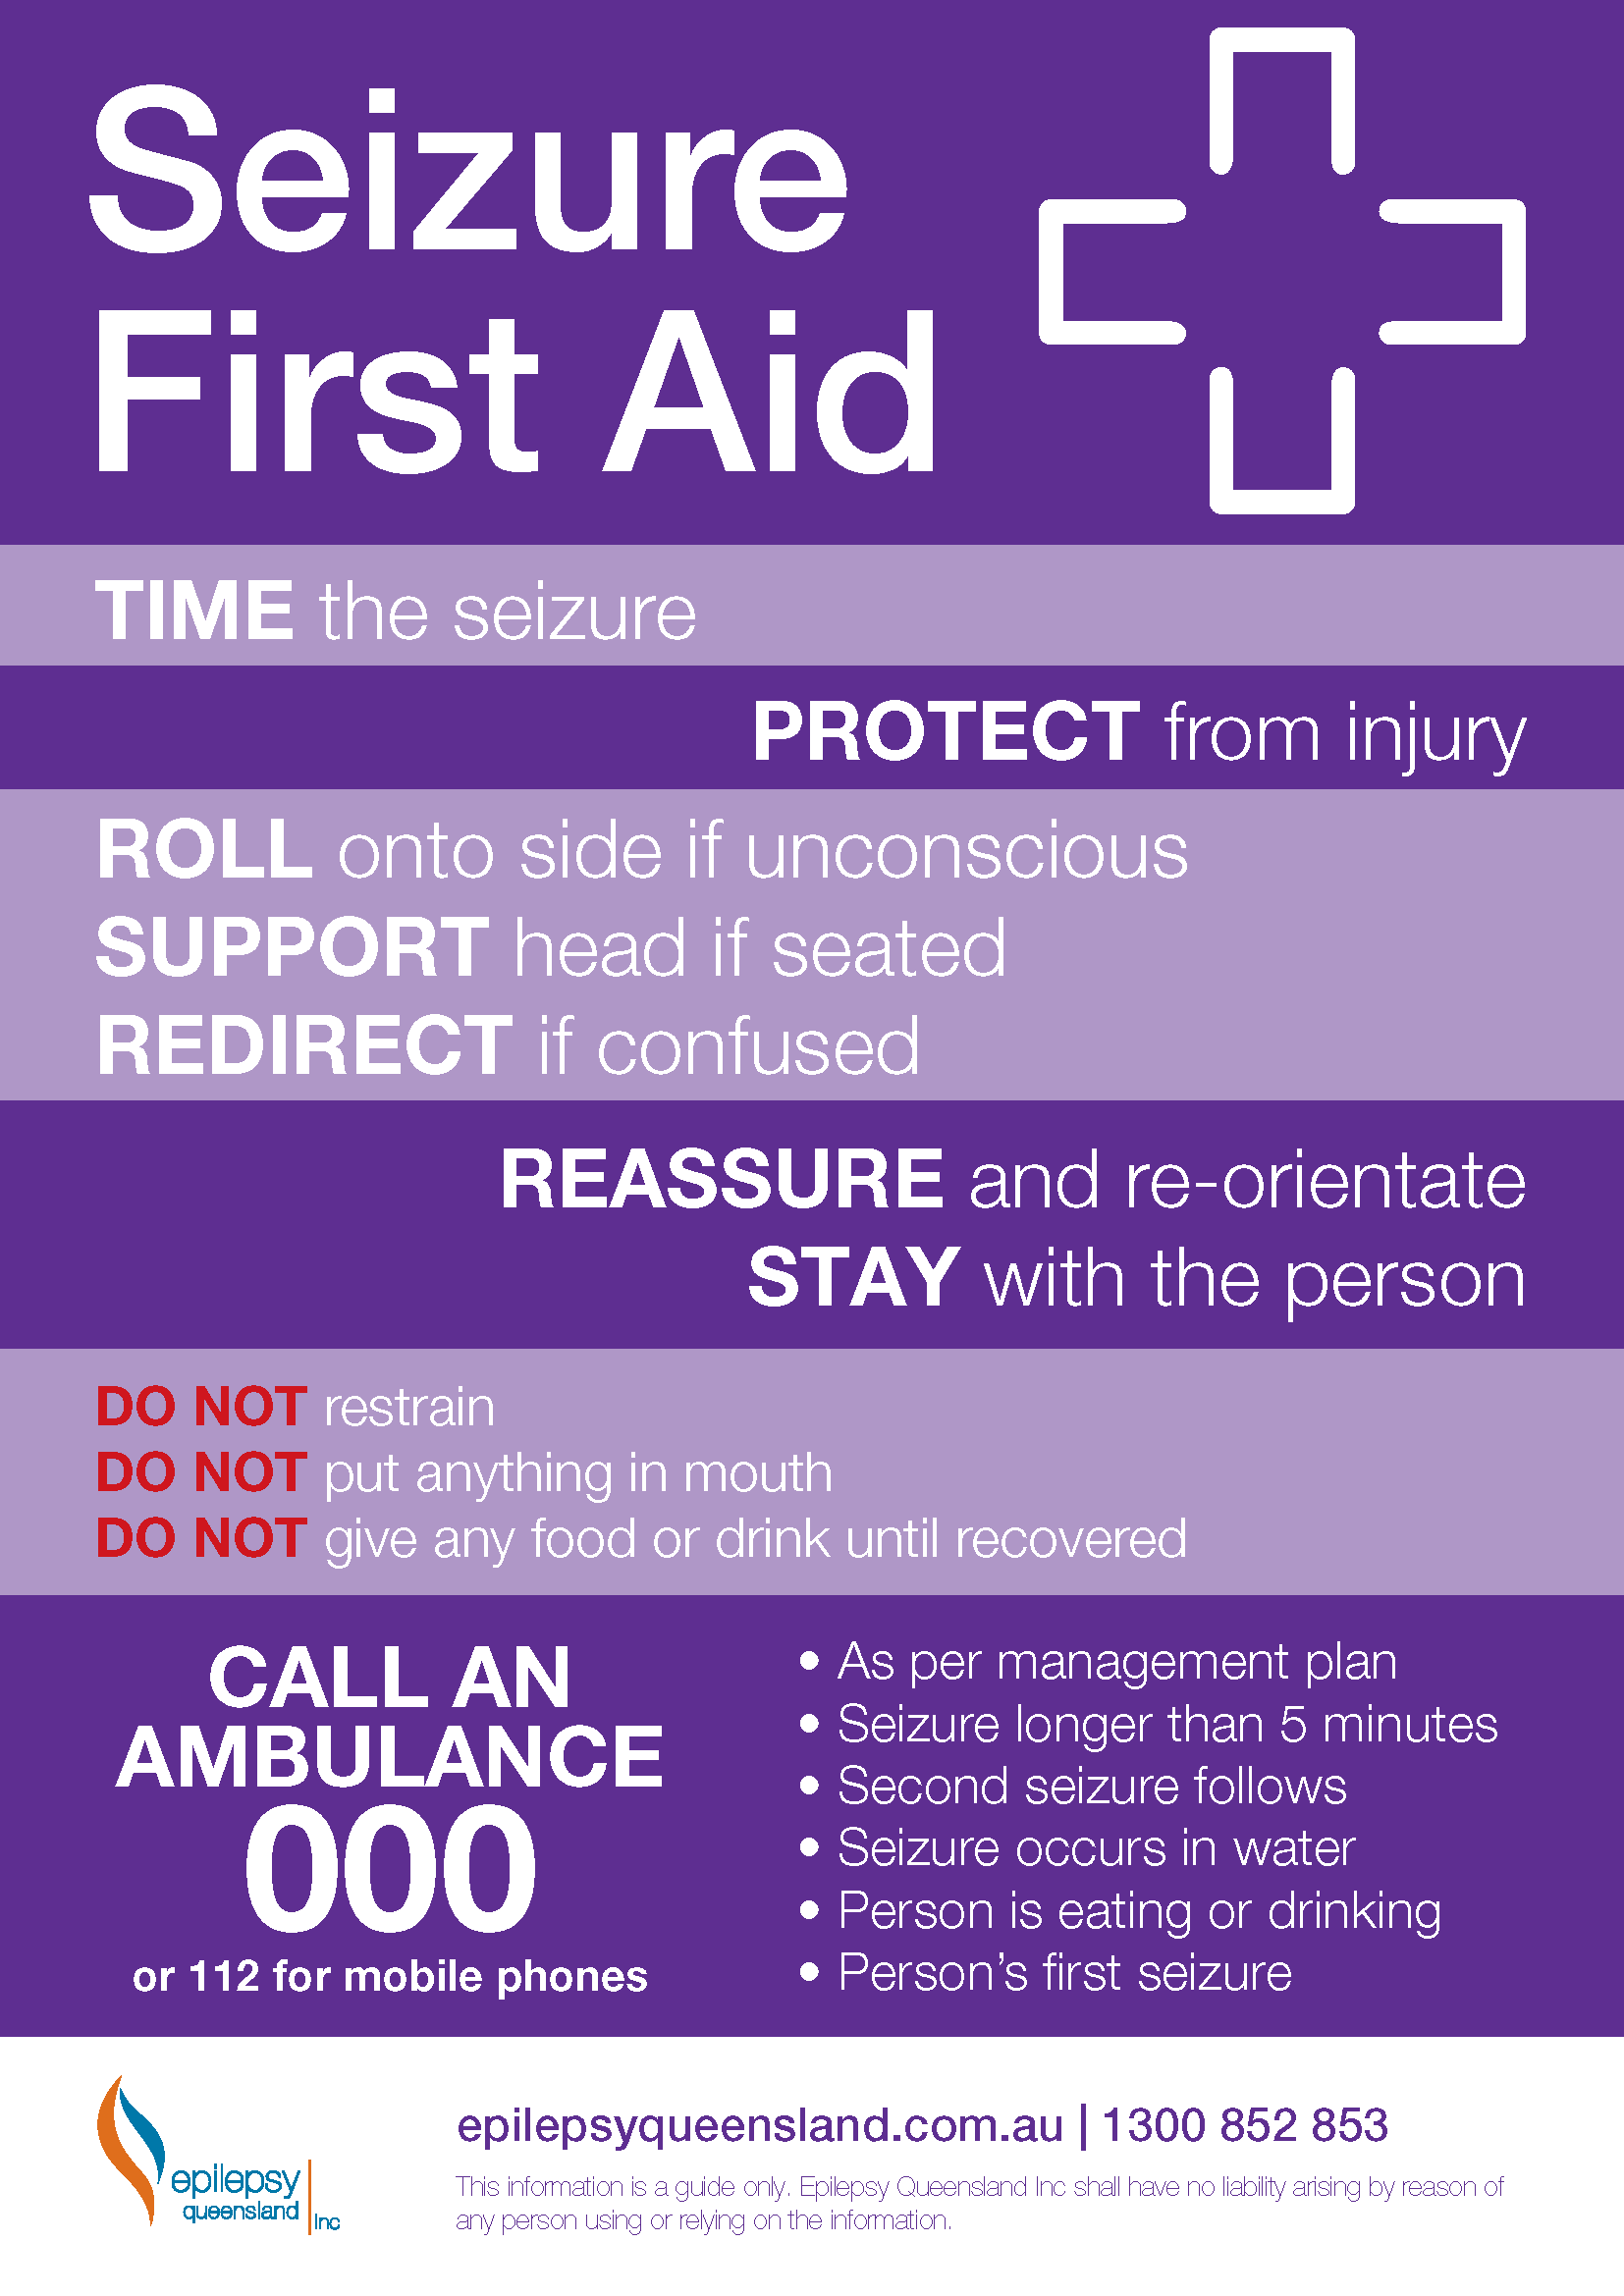 ibsurgeon first aid cracked